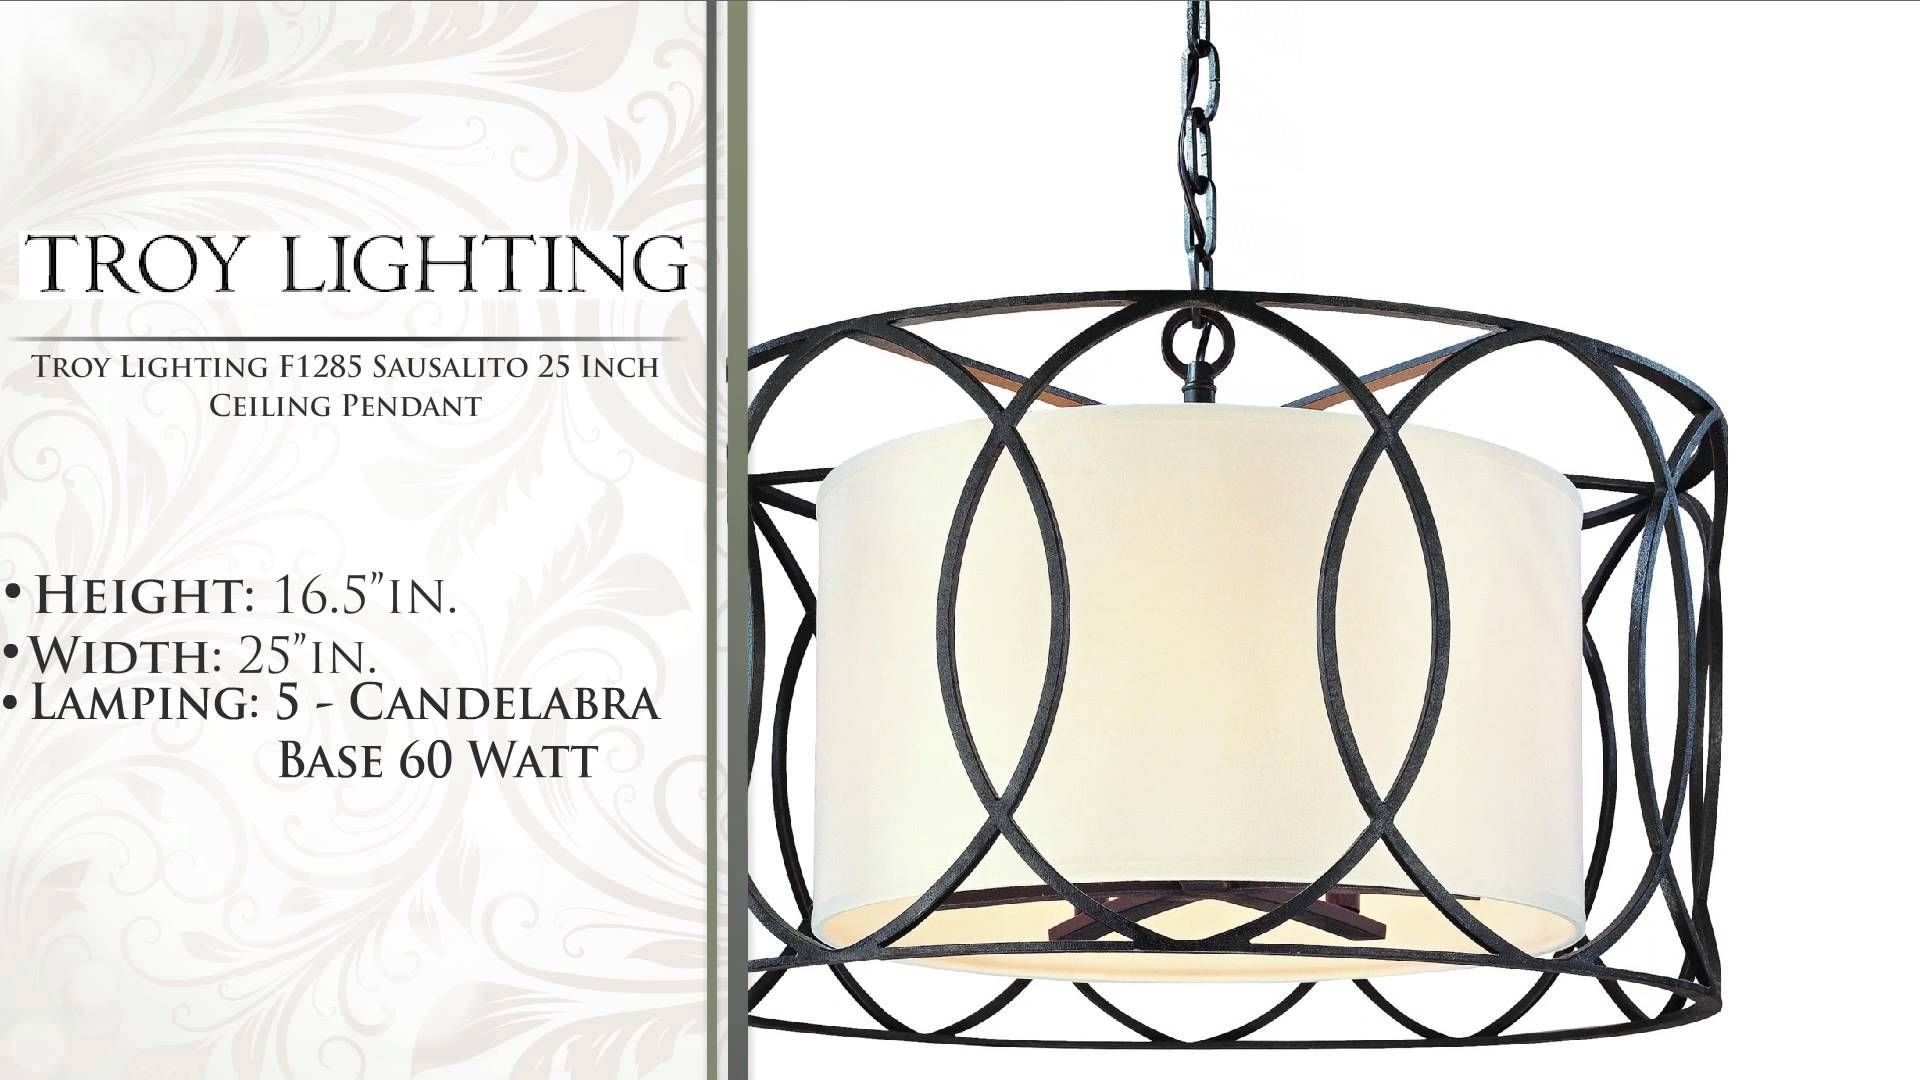 Troy Lighting F1285 Sausalito 25 Inch Ceiling Pendant – Youtube Throughout Troy Lighting Sausalito Pendants (View 7 of 15)